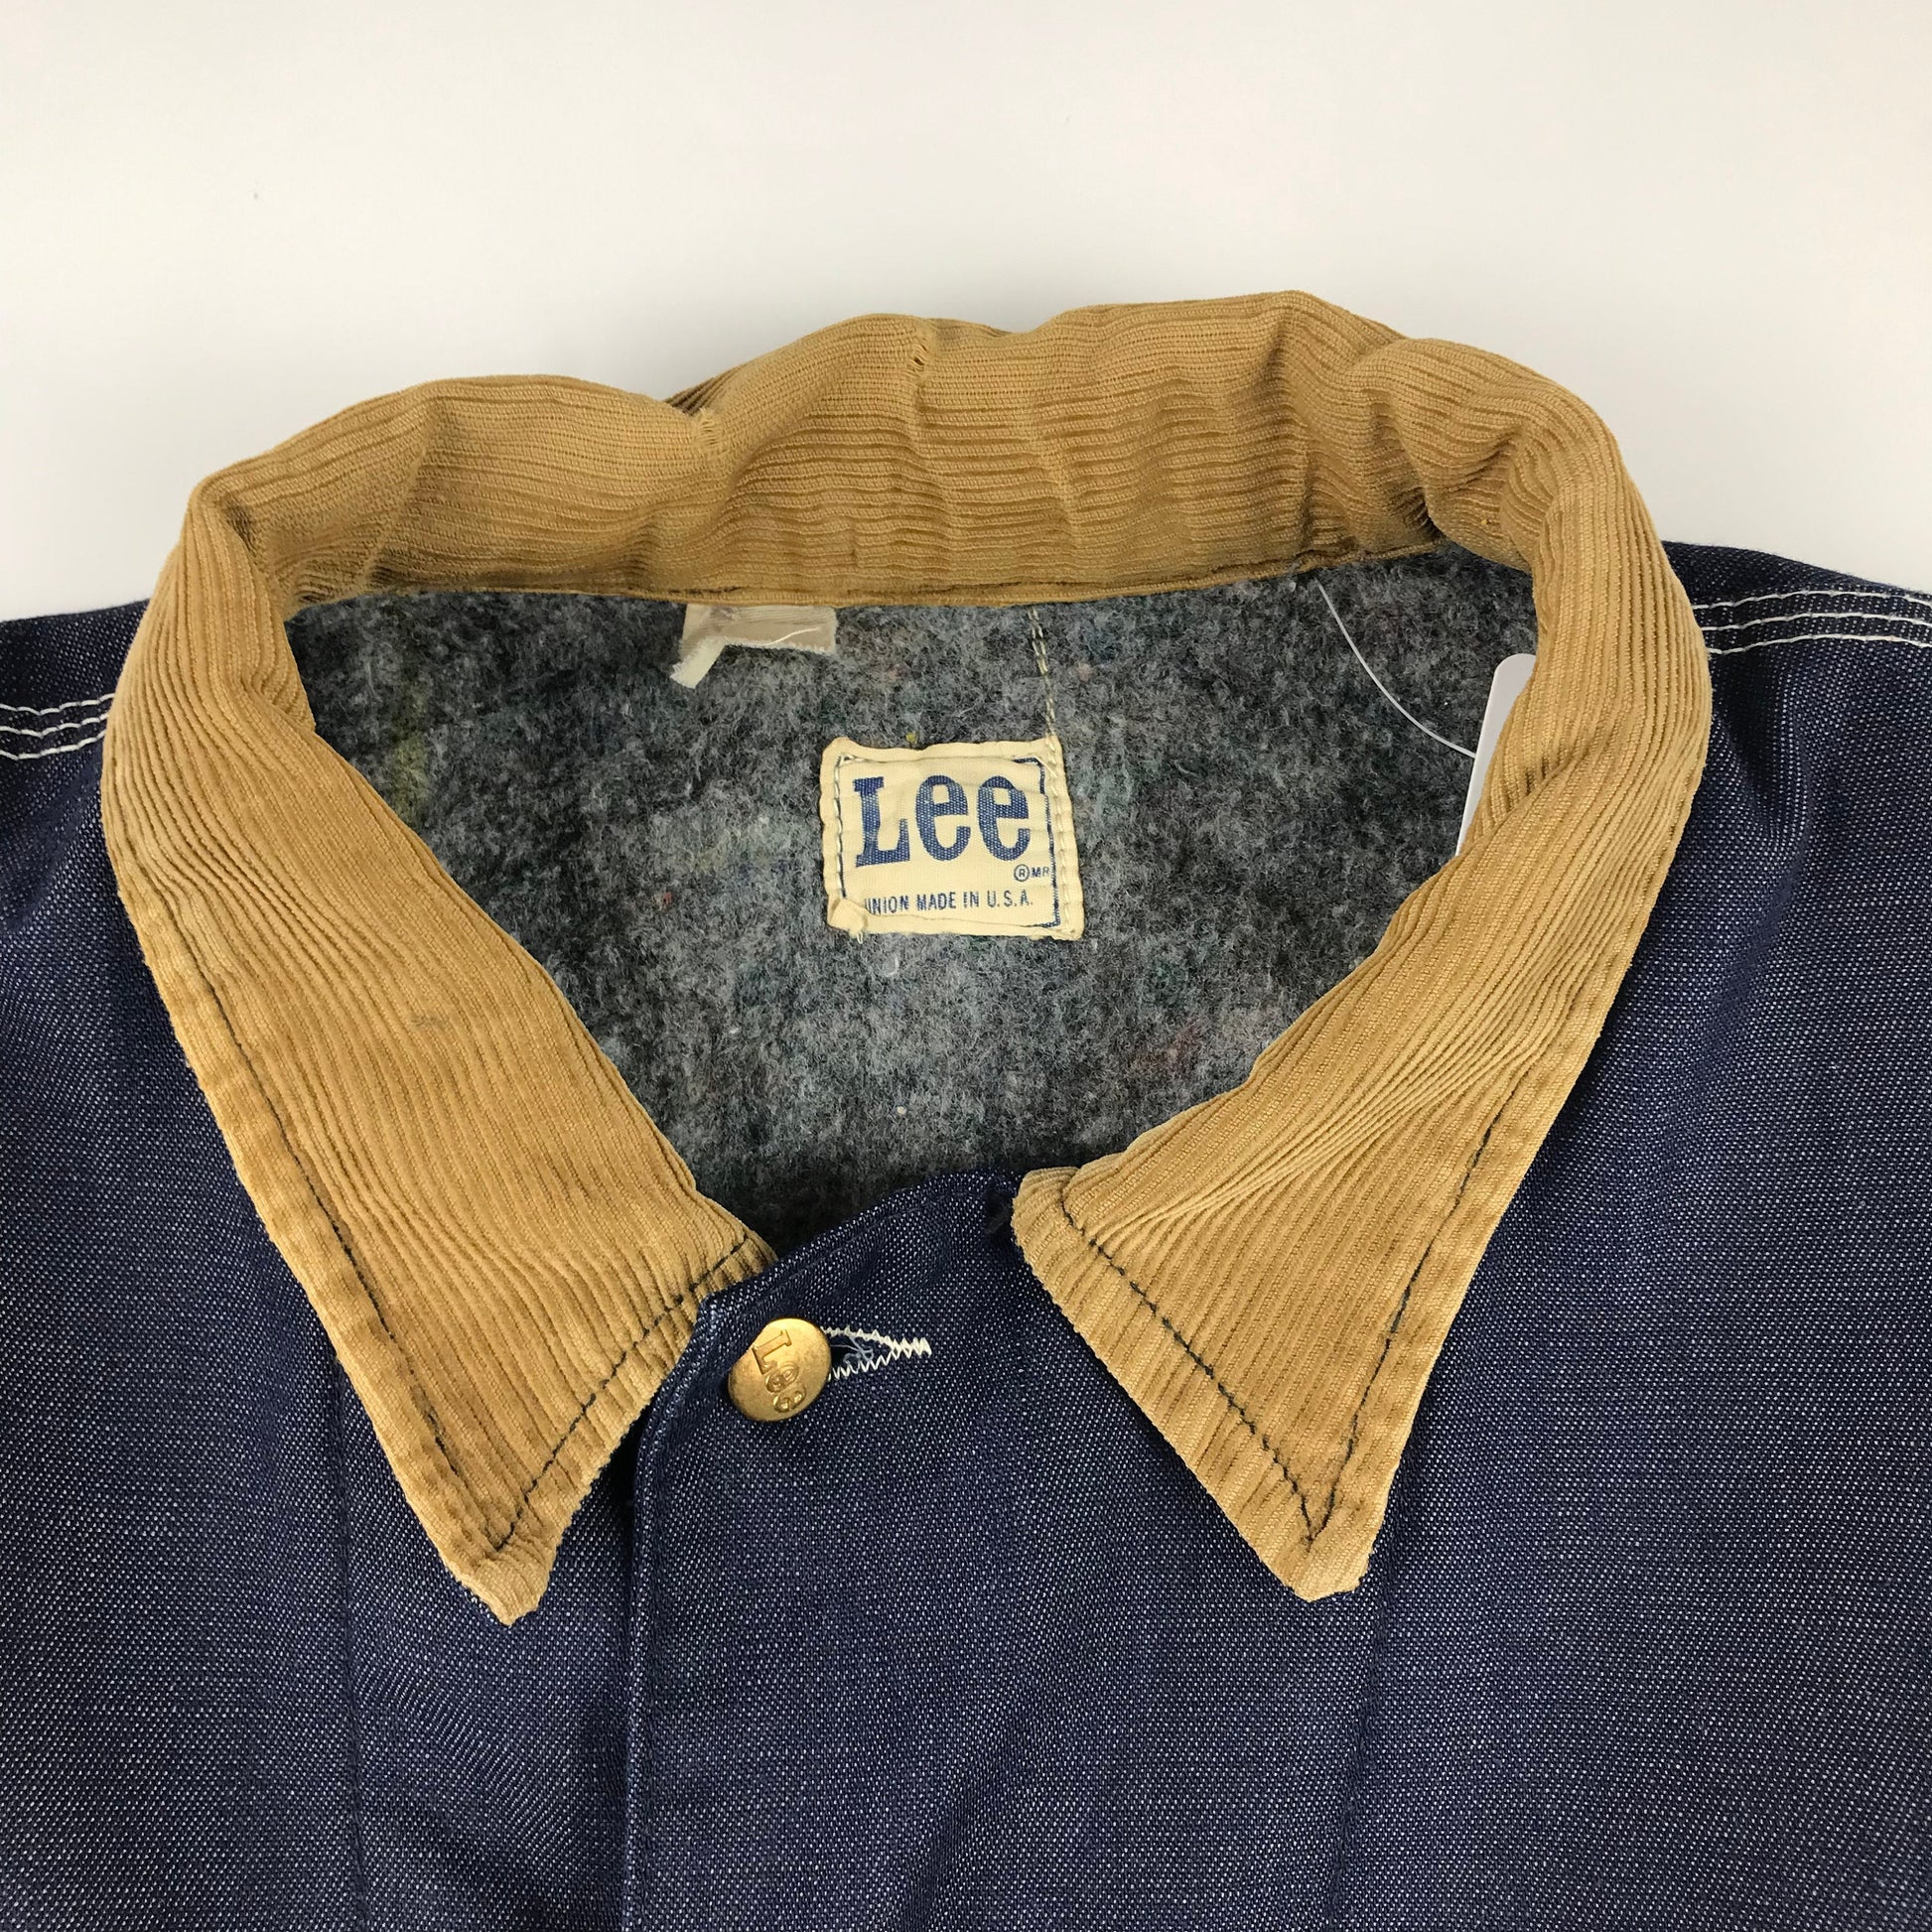 1970s Blanket Lined Lee Denim Chore Jacket Made in USA Size XXL/3XL